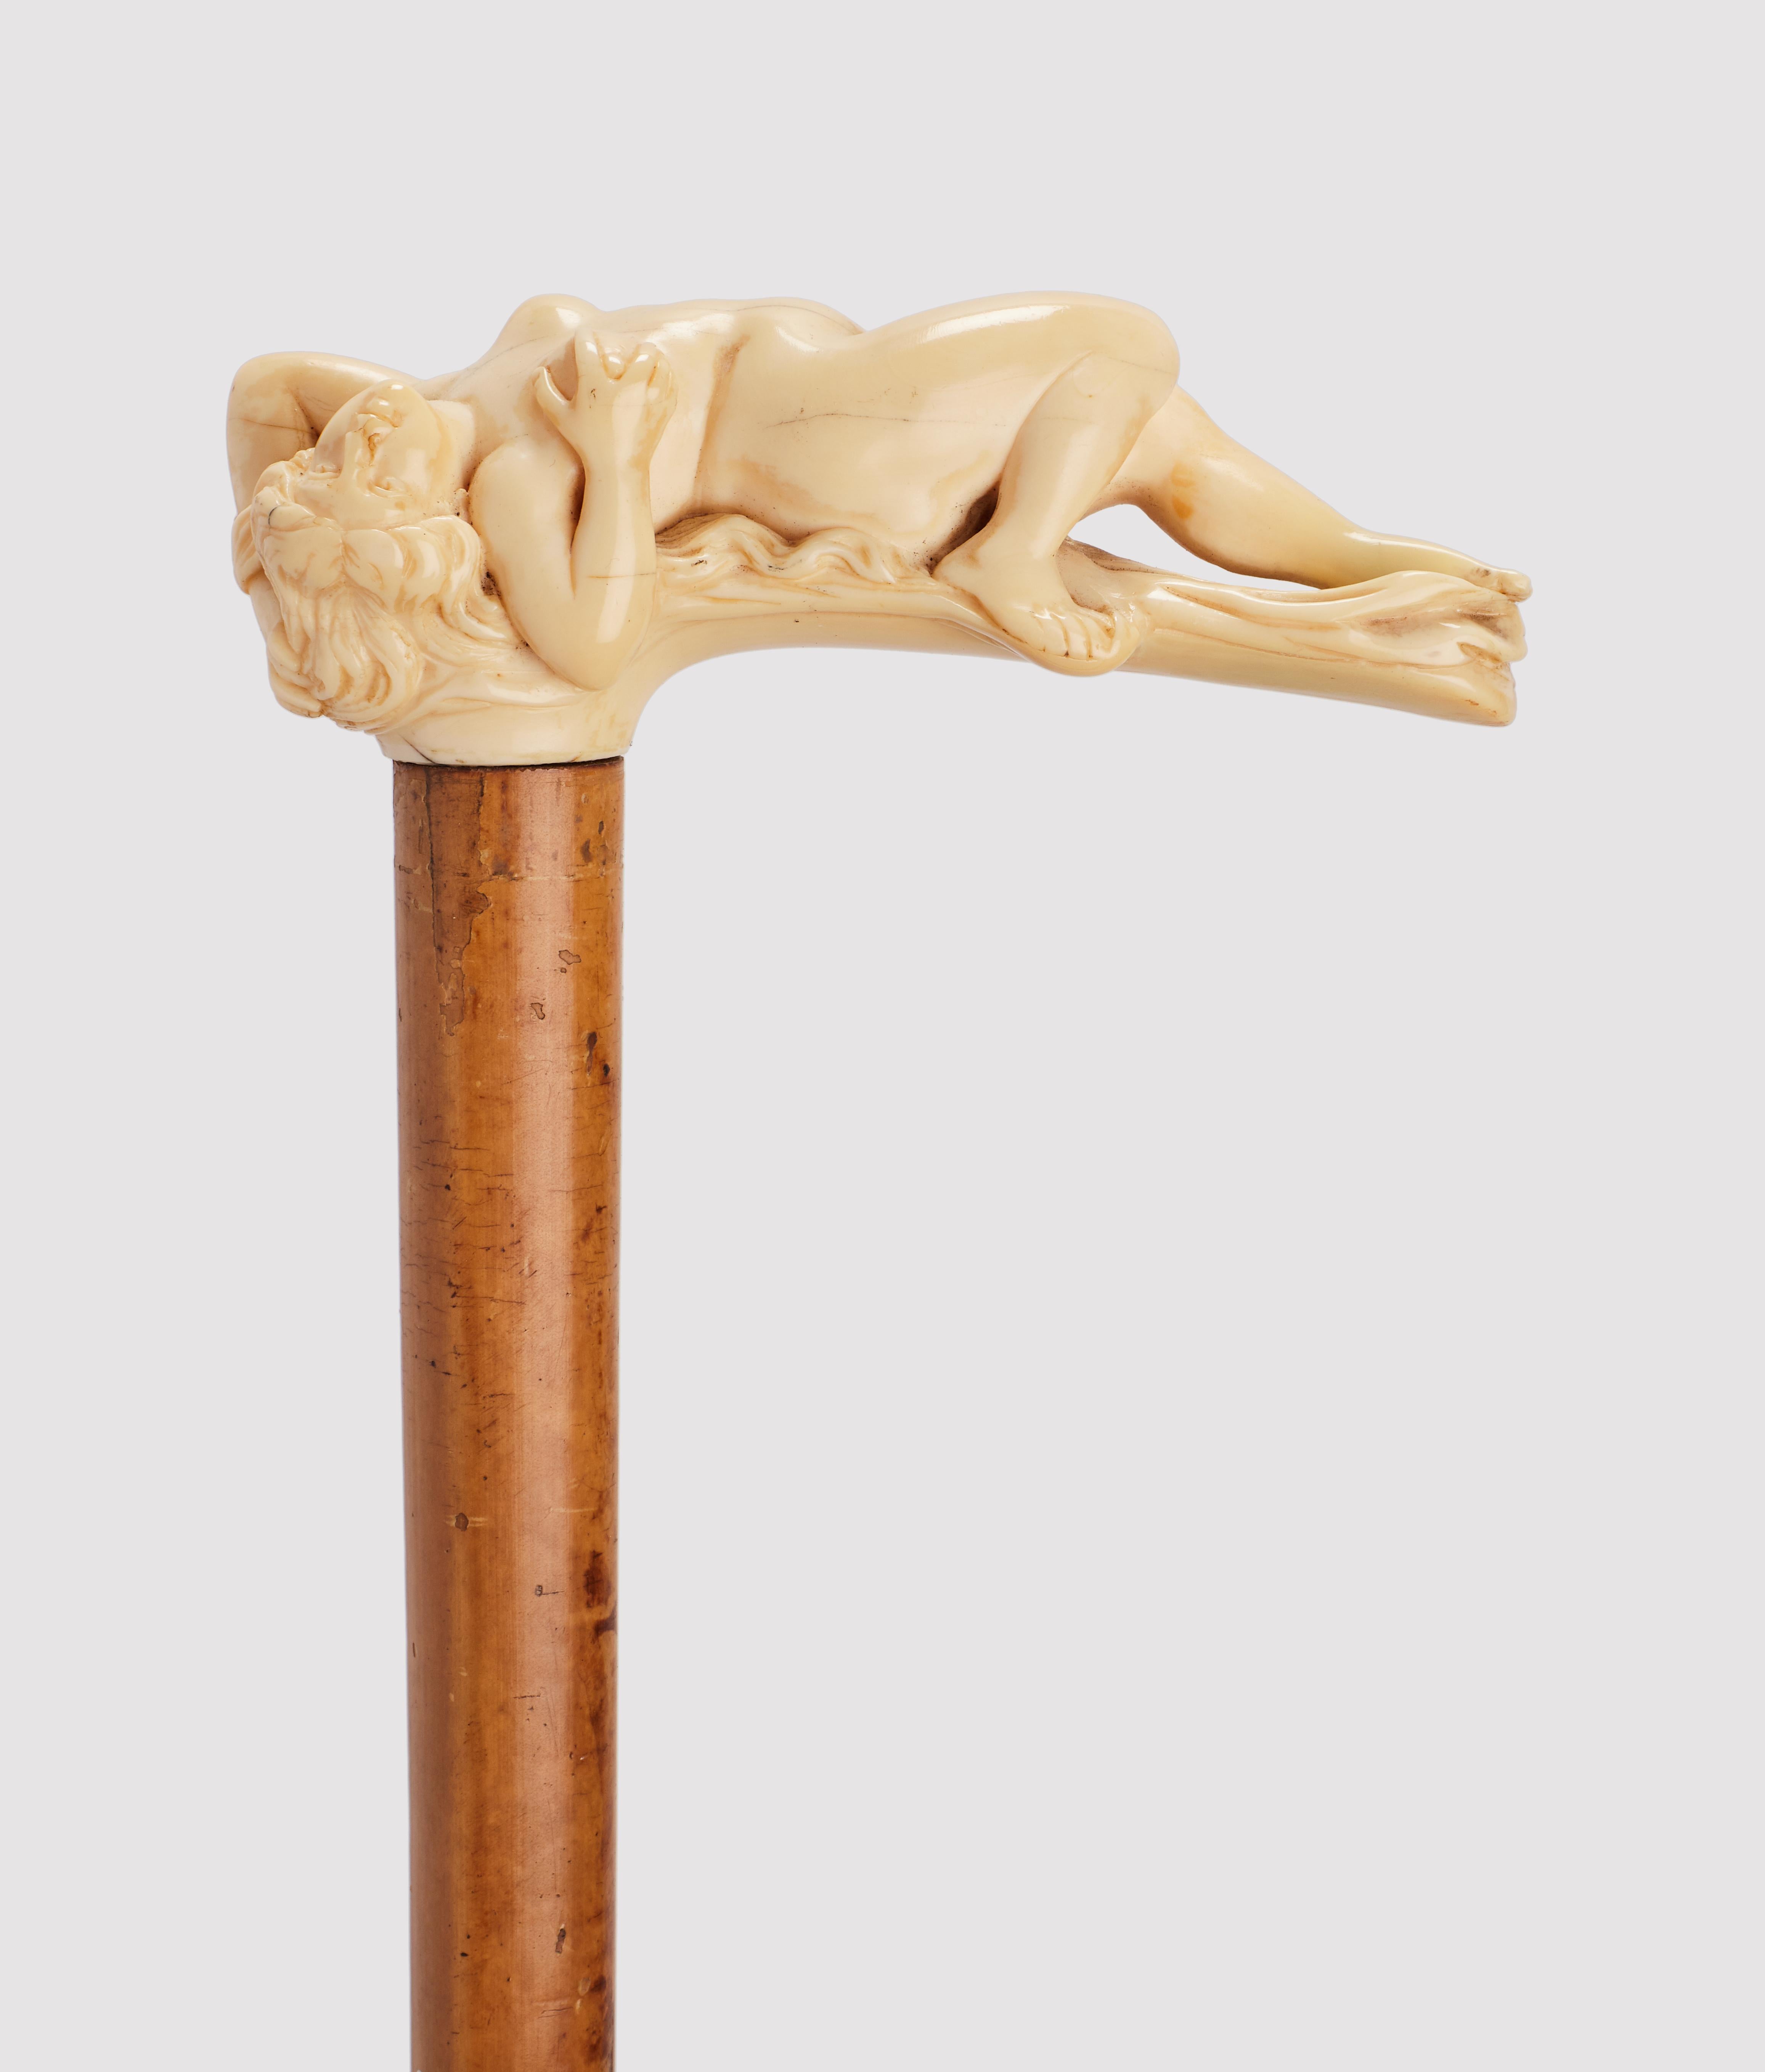 Walking stick: big ivory carved handle. Art Nouveau cane fine carving executed, it depicts a nude lying women. Malacca wood shaft. Horn ferrule. France circa 1900. (SHIP TO EU ONLY)